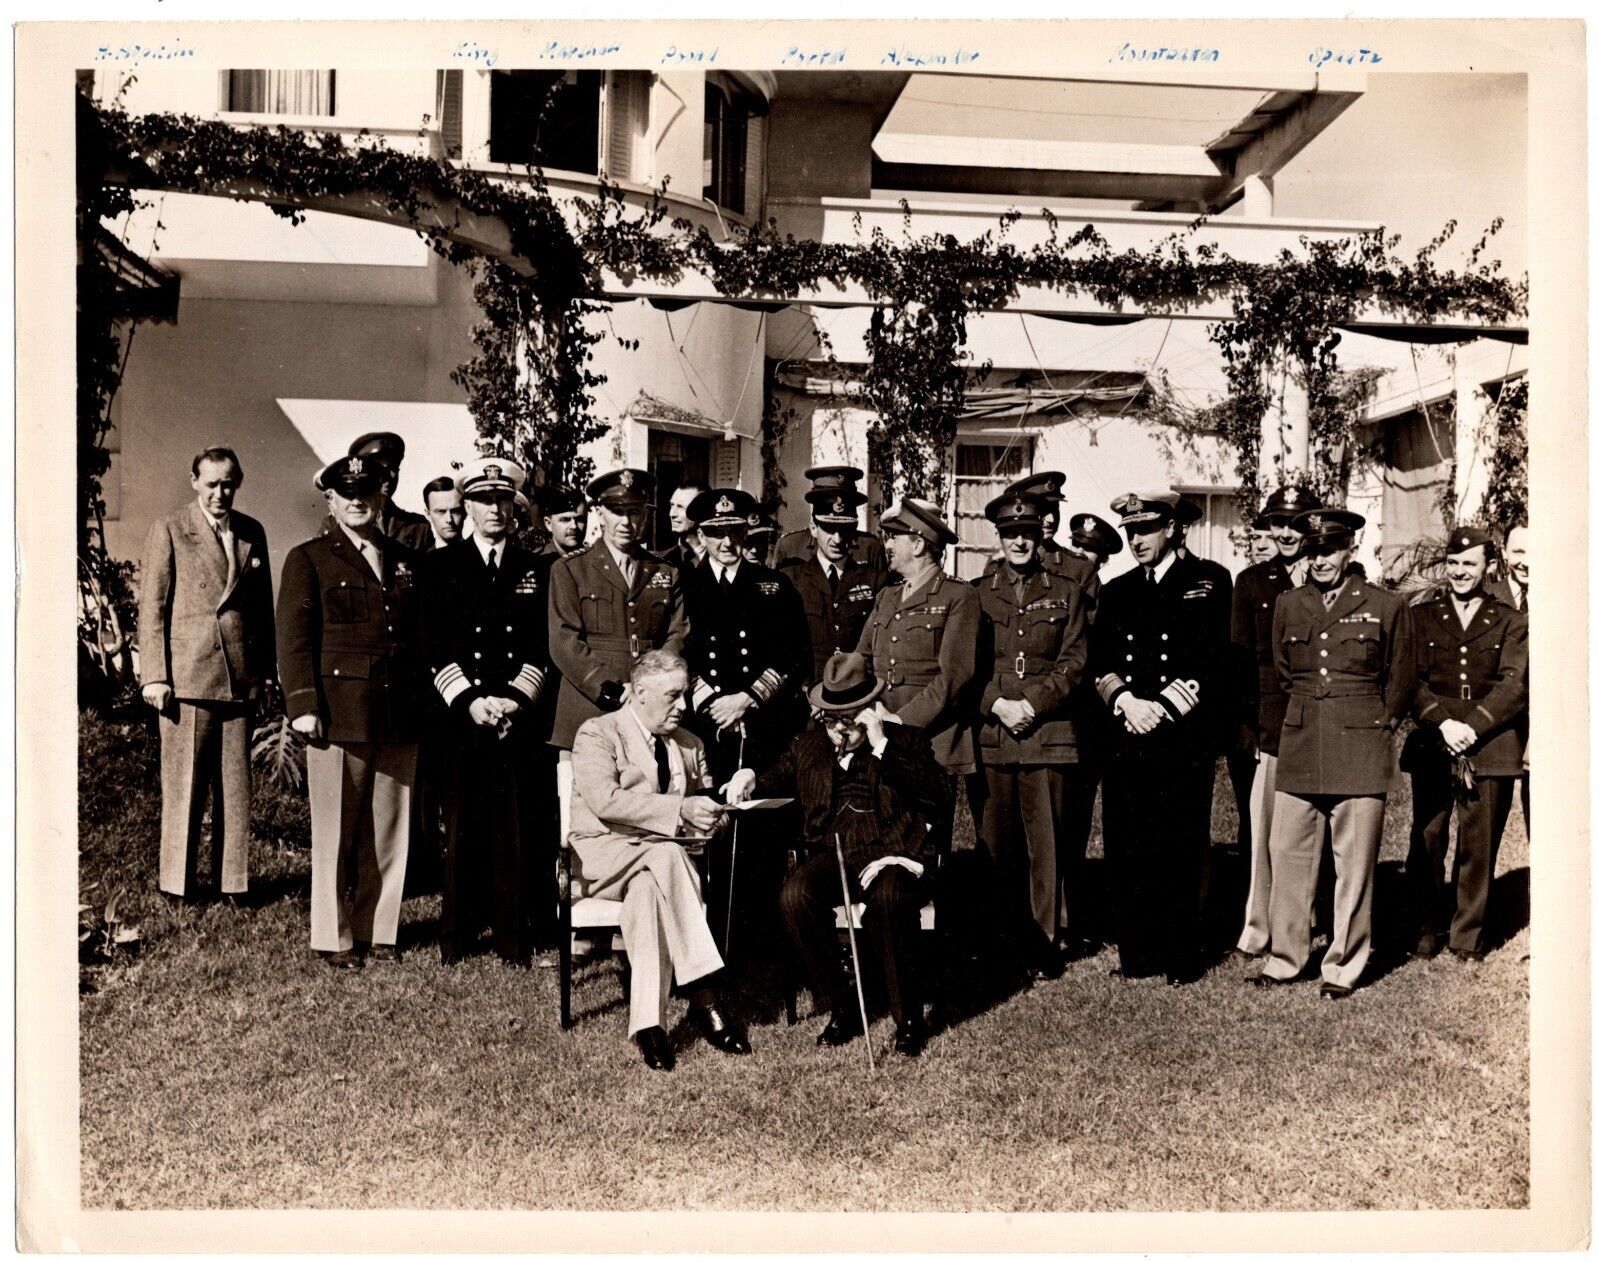 24 Jan 1943 US Navy photo of Churchill and FDR with their retinues at Casablanca